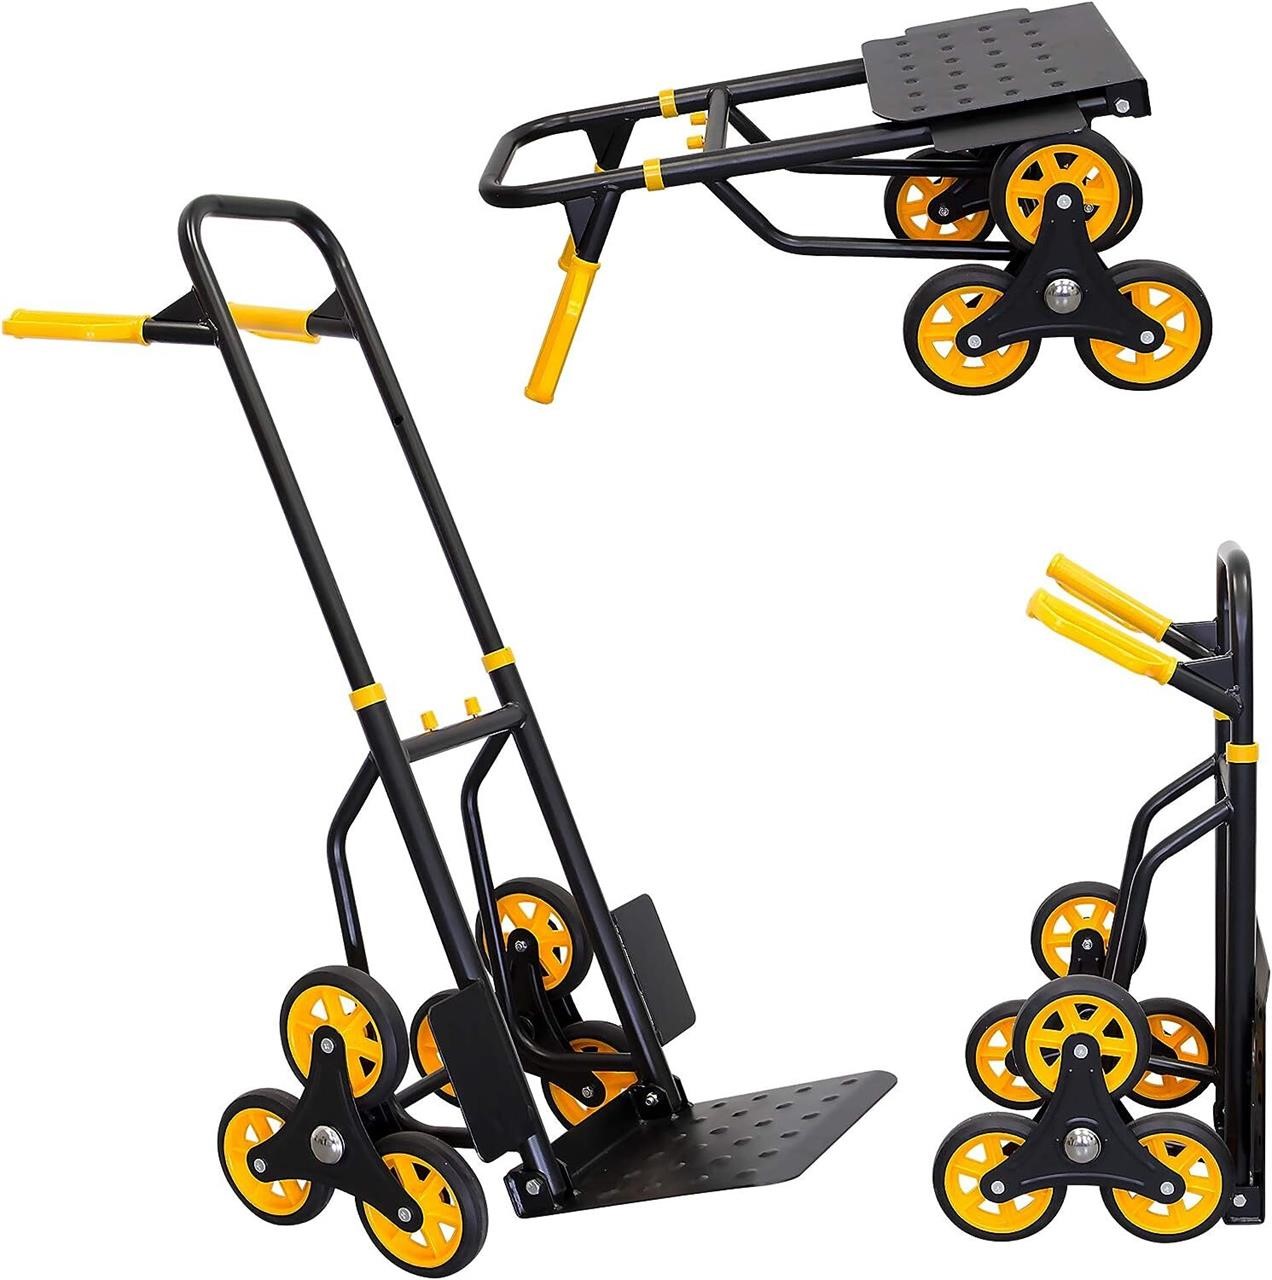 Mount-It! Stair Climber Hand Truck and Dolly, 330